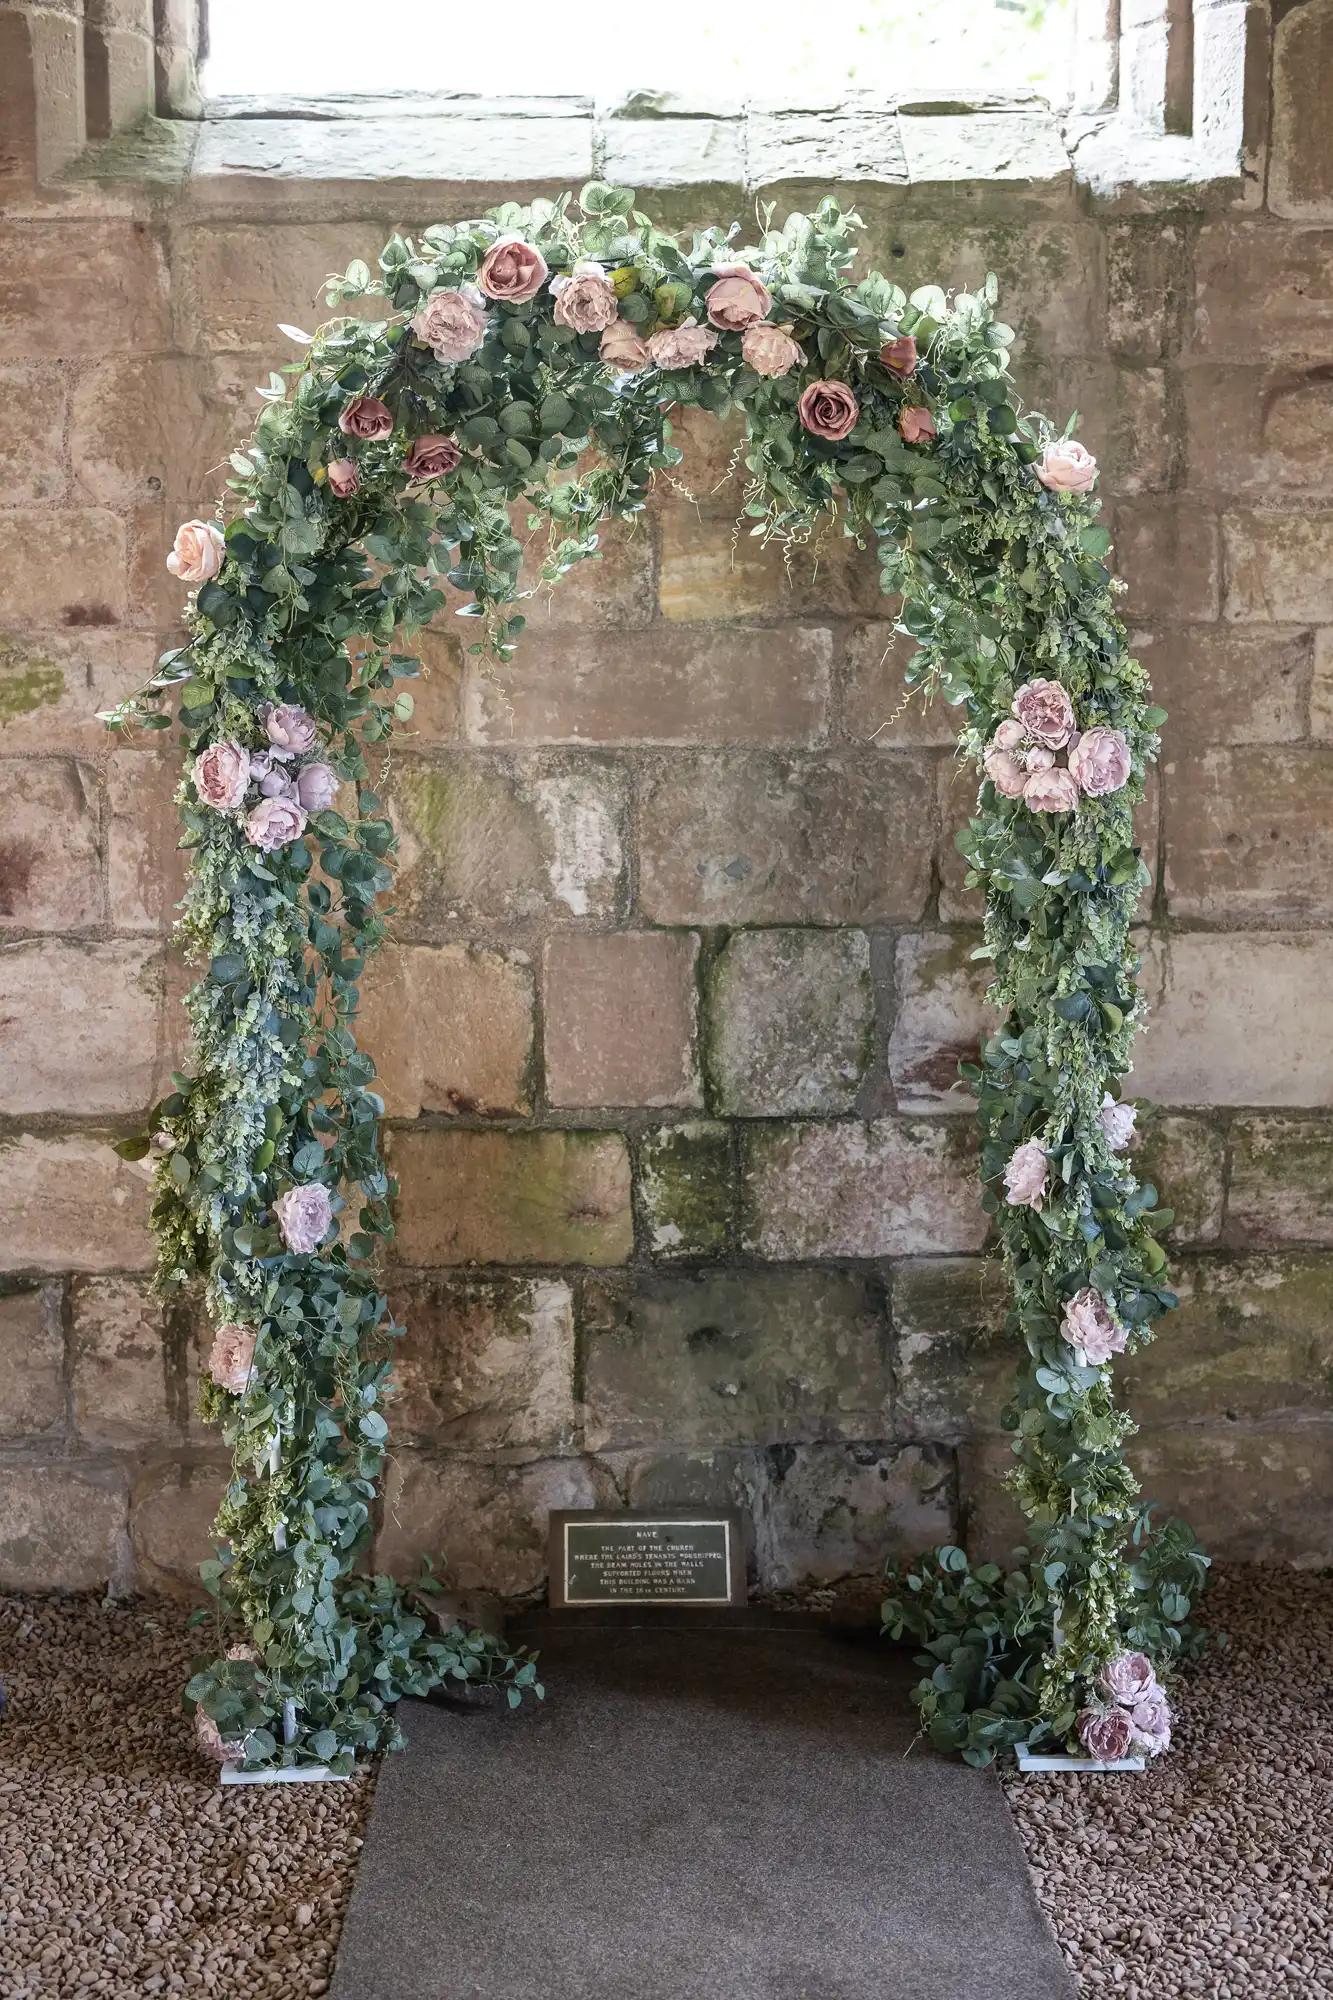 Floral arch with pink and white roses and green leaves, set against an aged stone wall in a historic building.